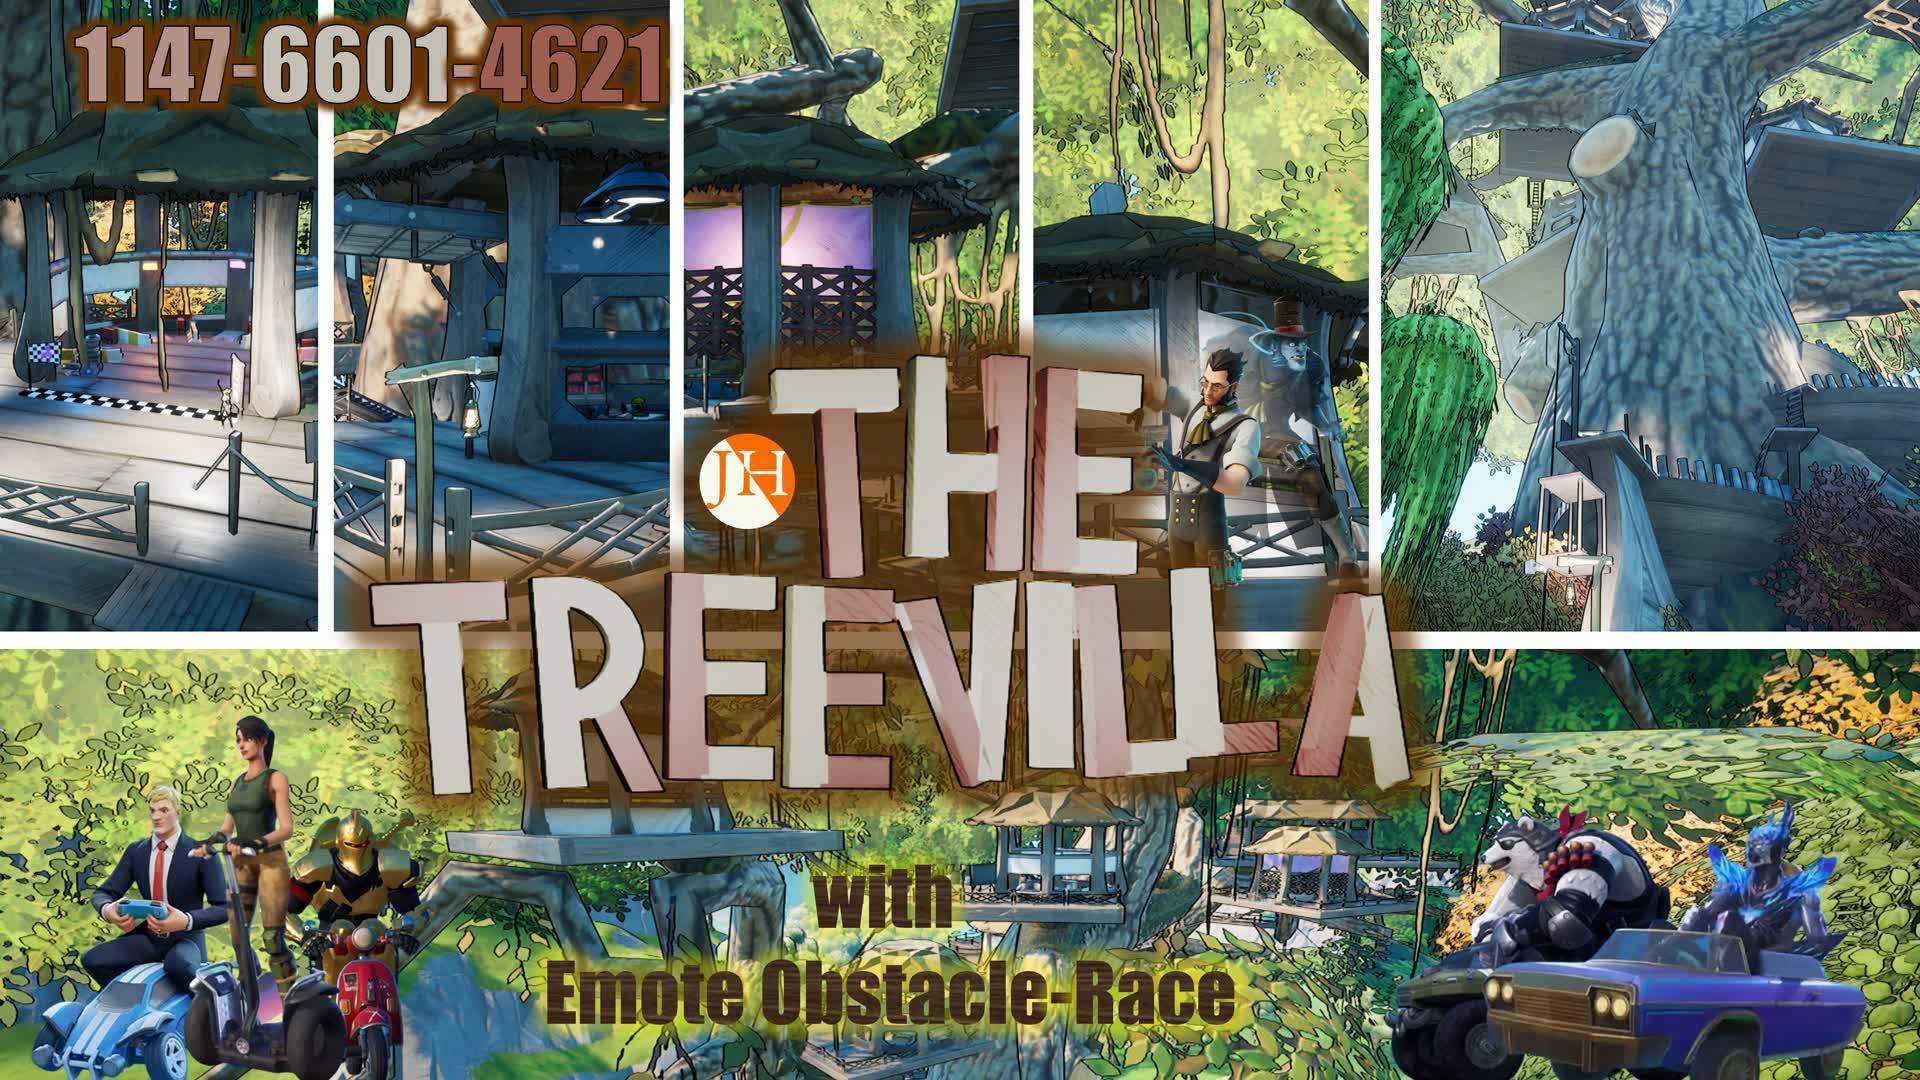 THE TREEVILLA - EMOTE OBSTACLE RACE